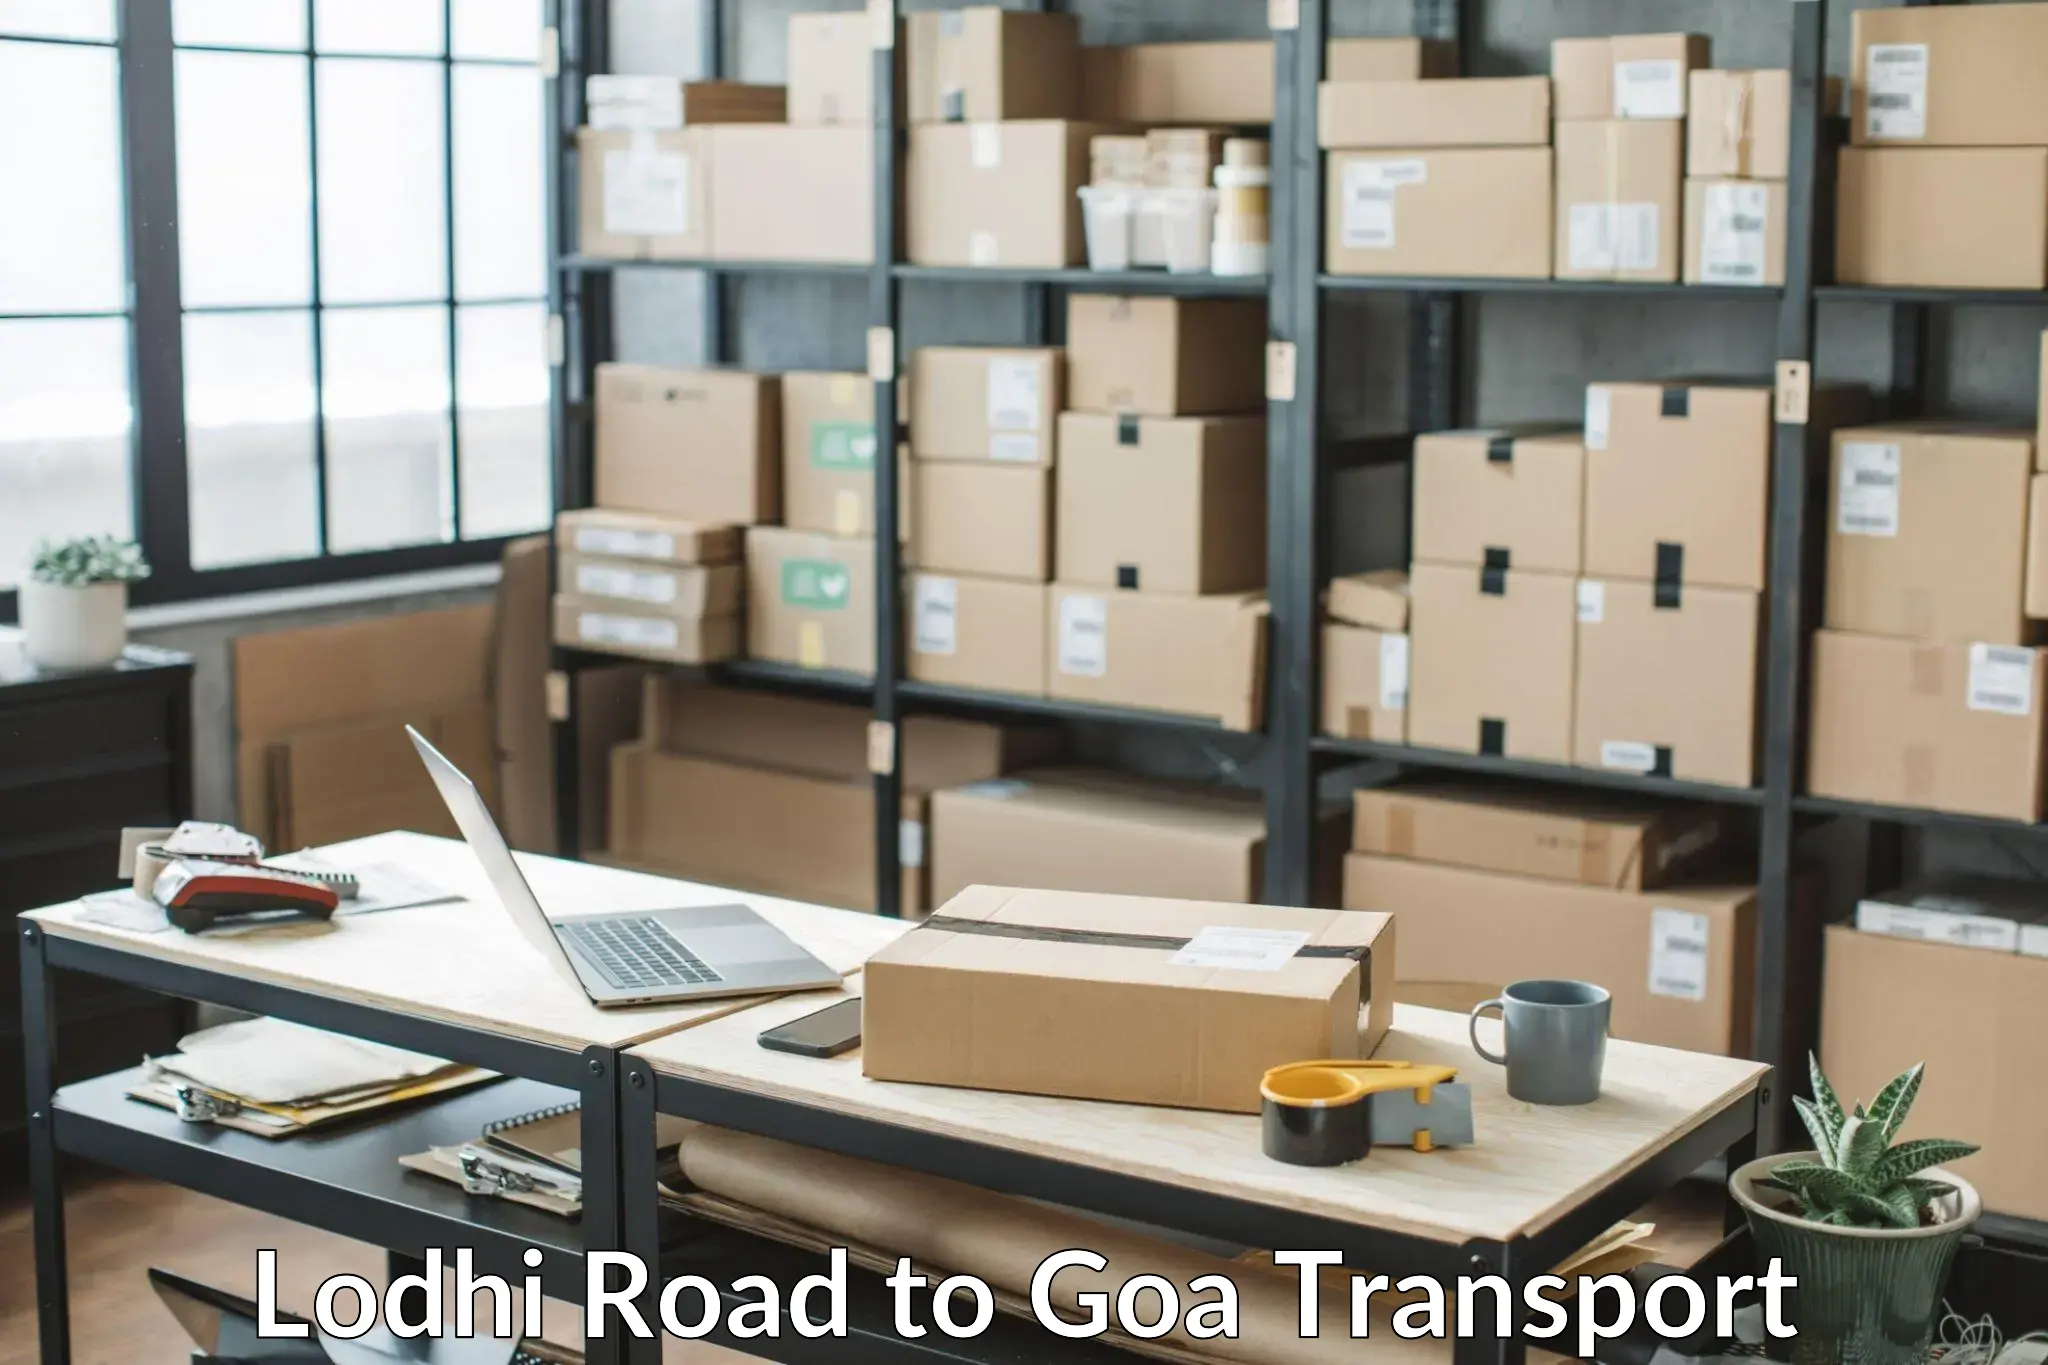 Delivery service Lodhi Road to Goa